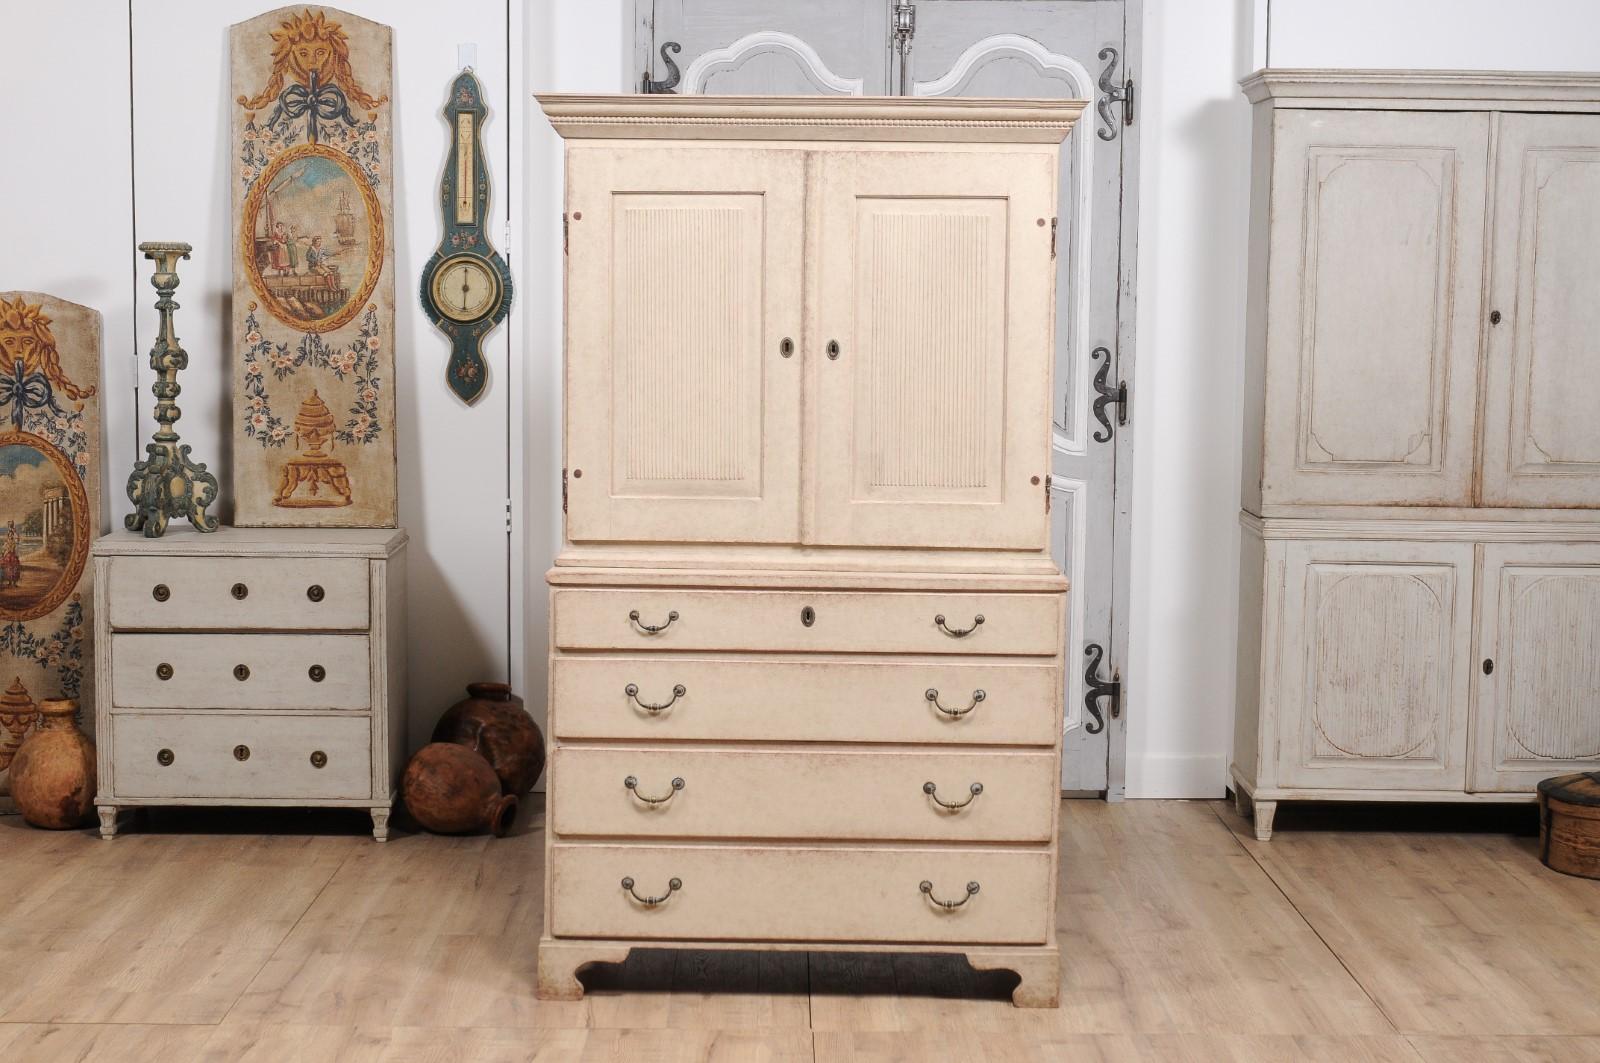 1834 Swedish Two-part Painted Cabinet with Doors and Graduated Drawers For Sale 5